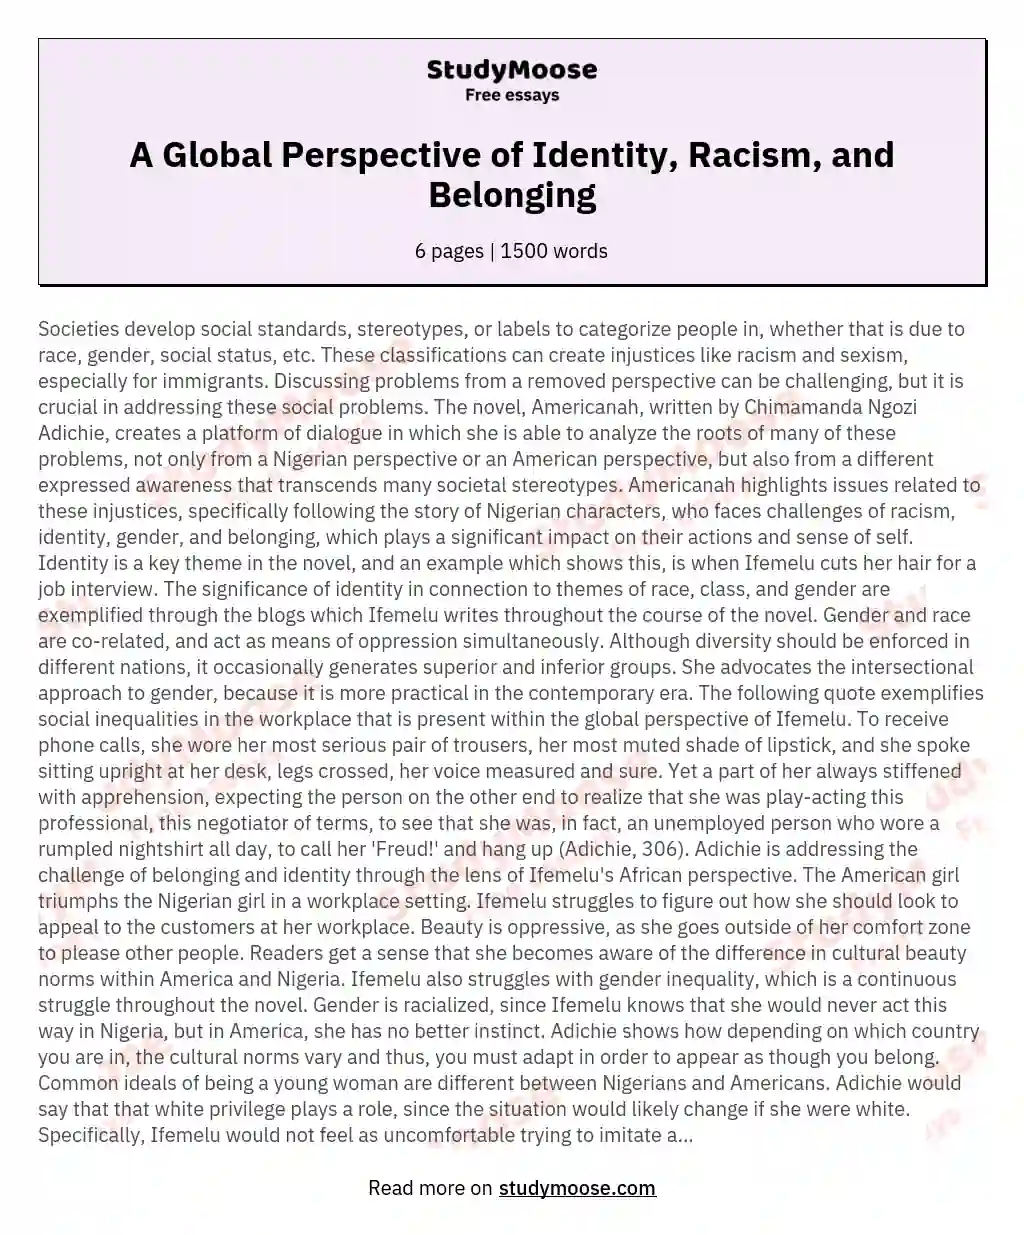 A Global Perspective of Identity, Racism, and Belonging essay